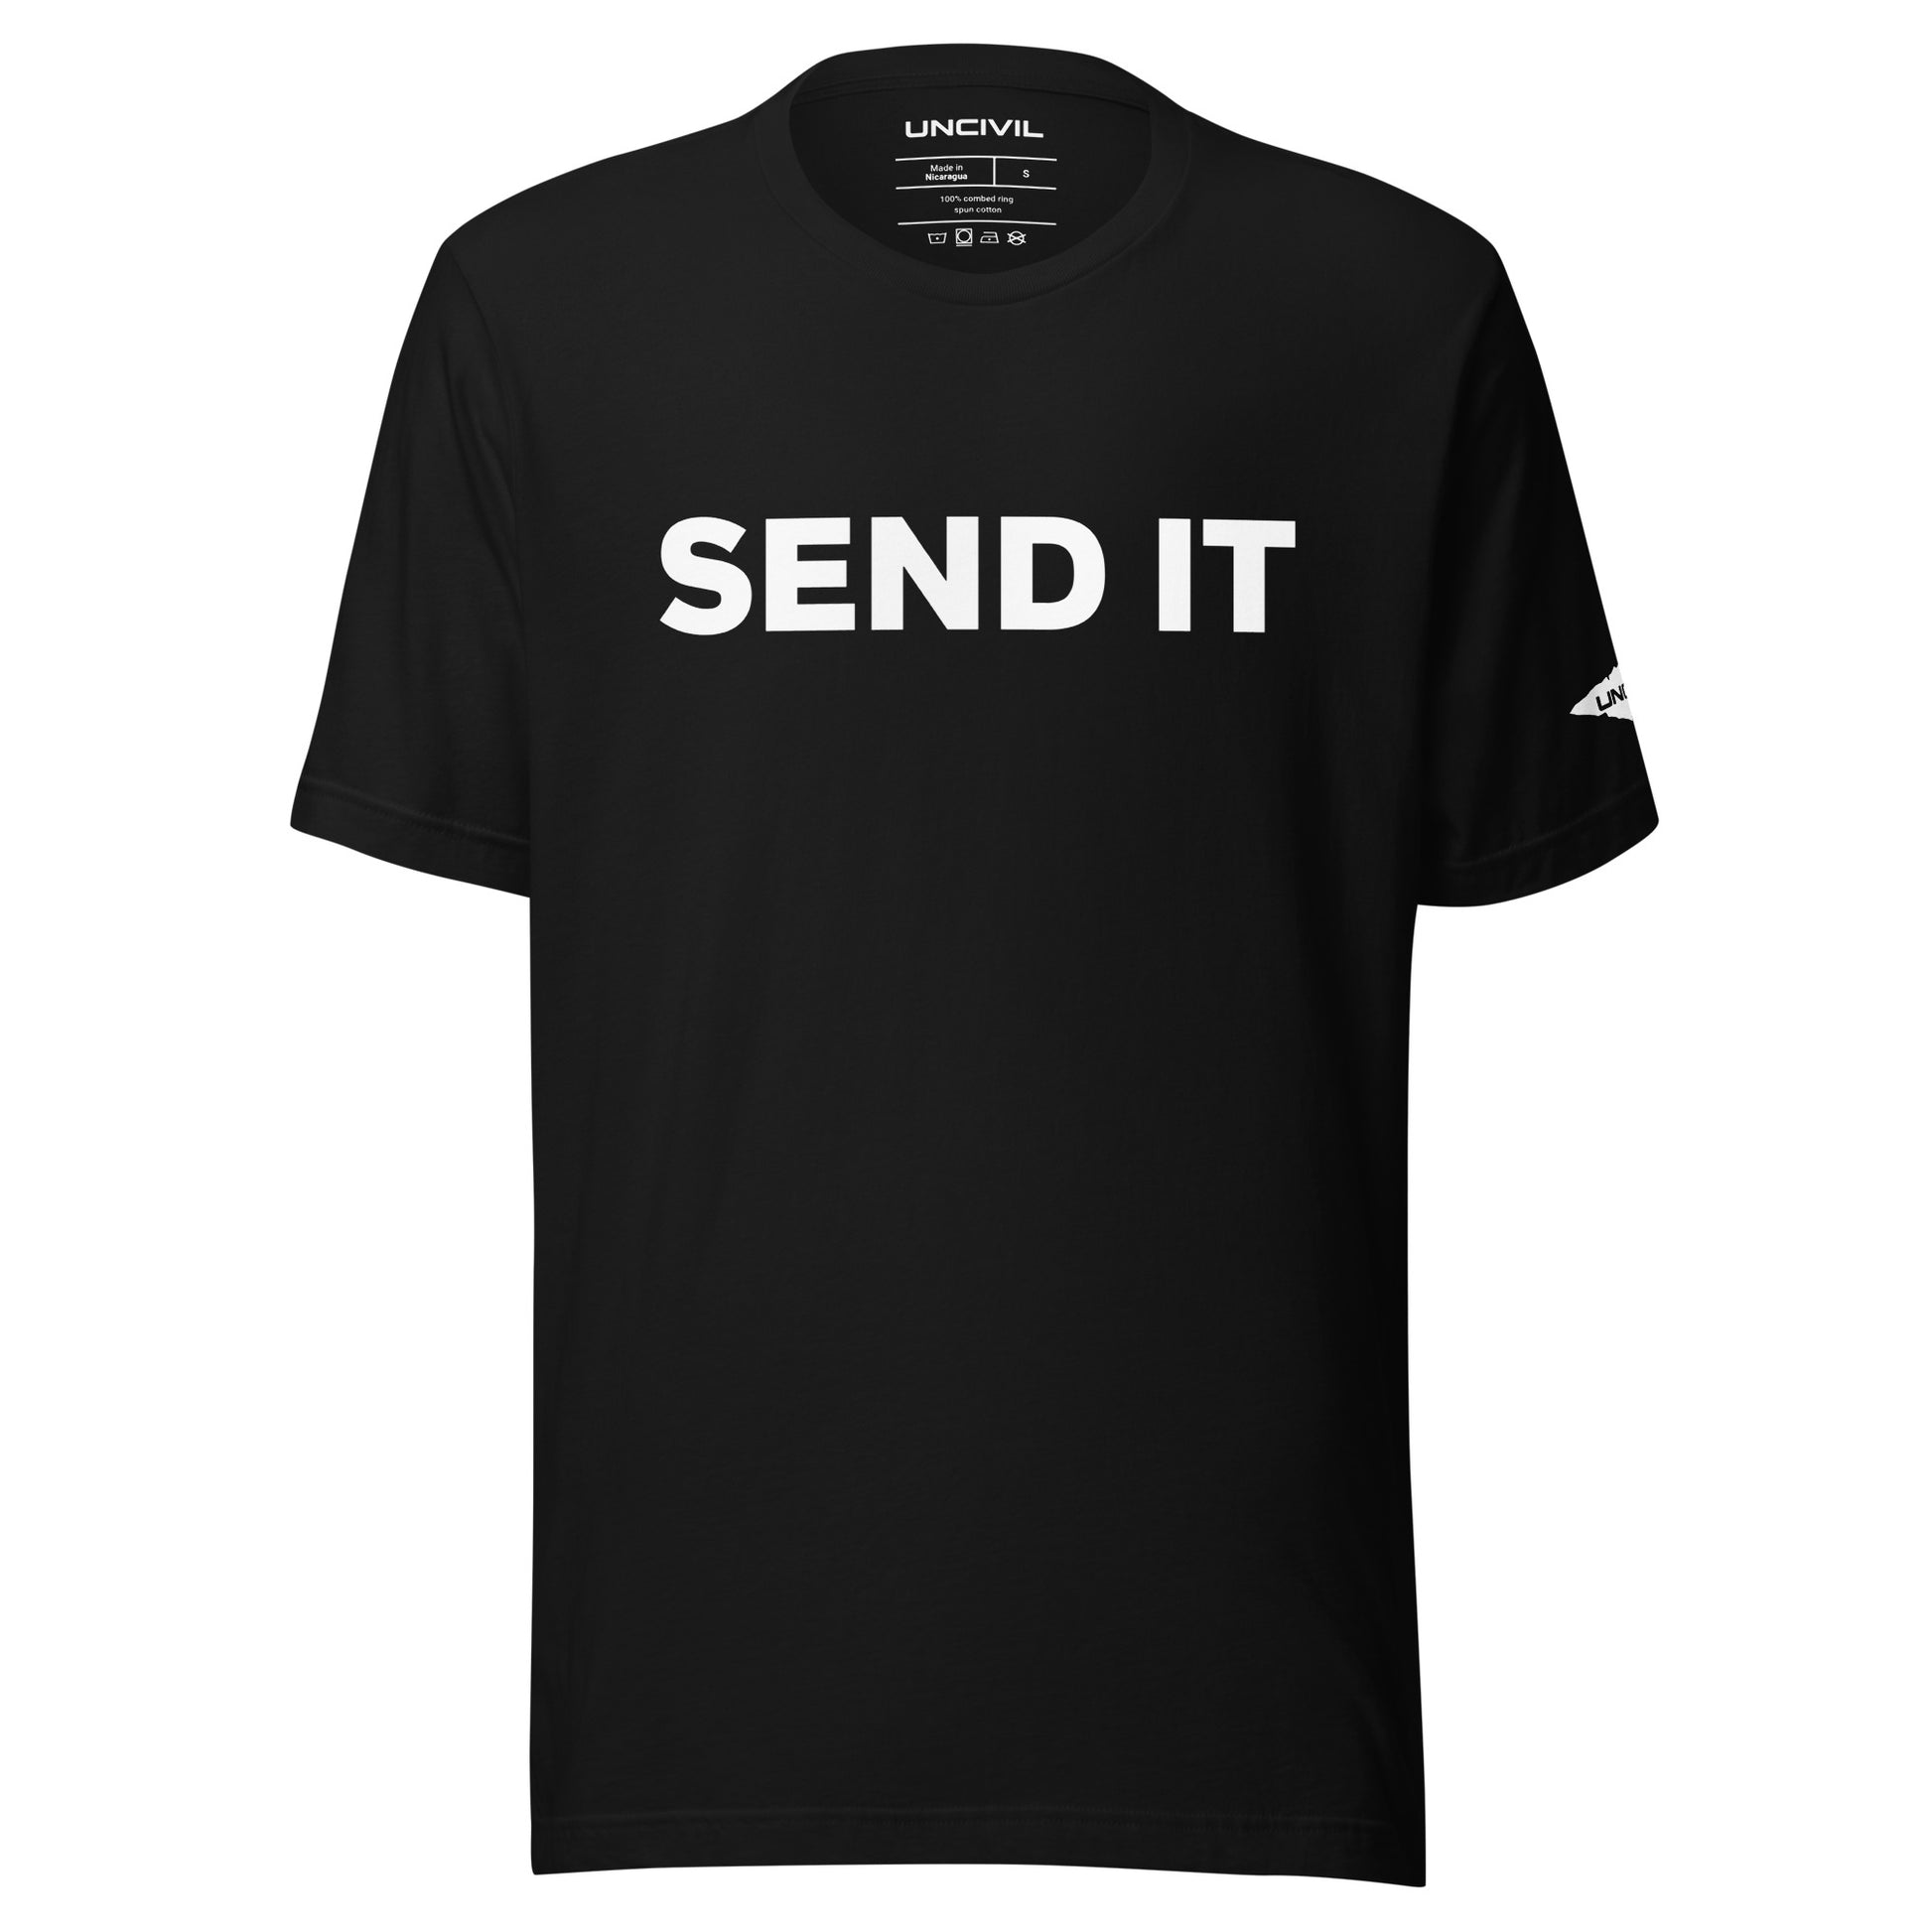 Send It is often used as an expression to indicate taking action or proceeding with a plan. Black men's shirt. 